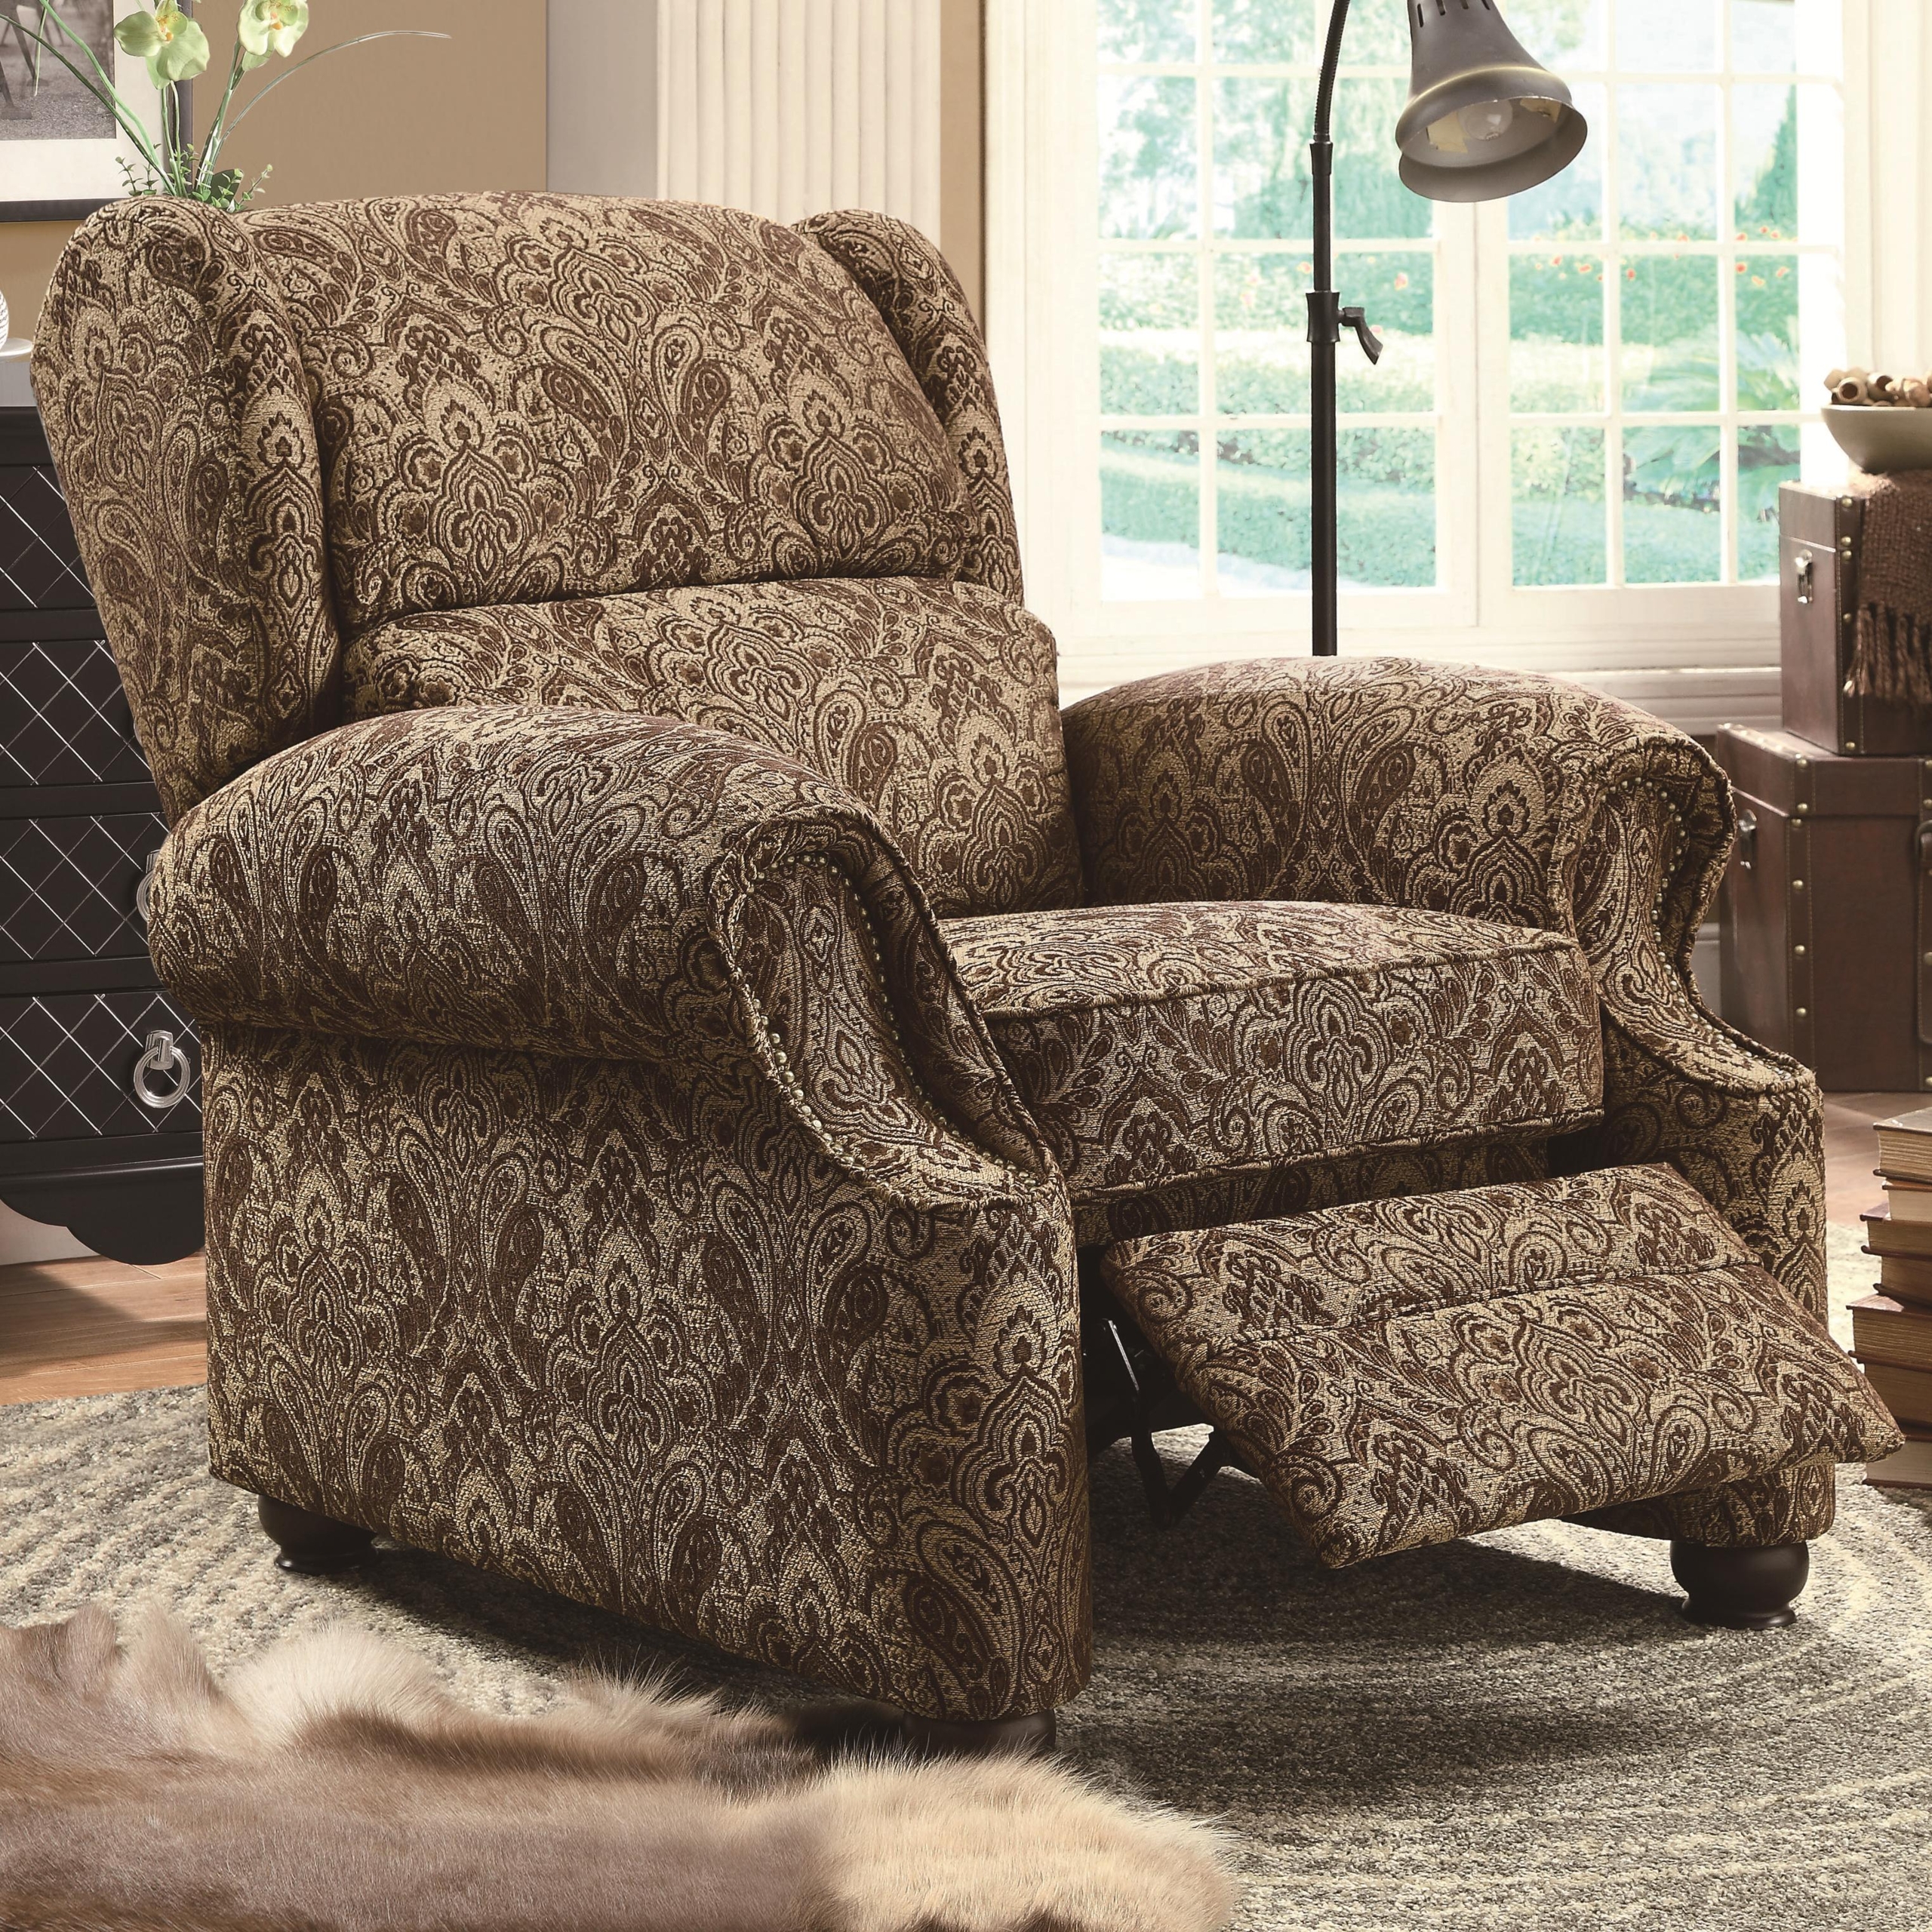 High back recliner chairs